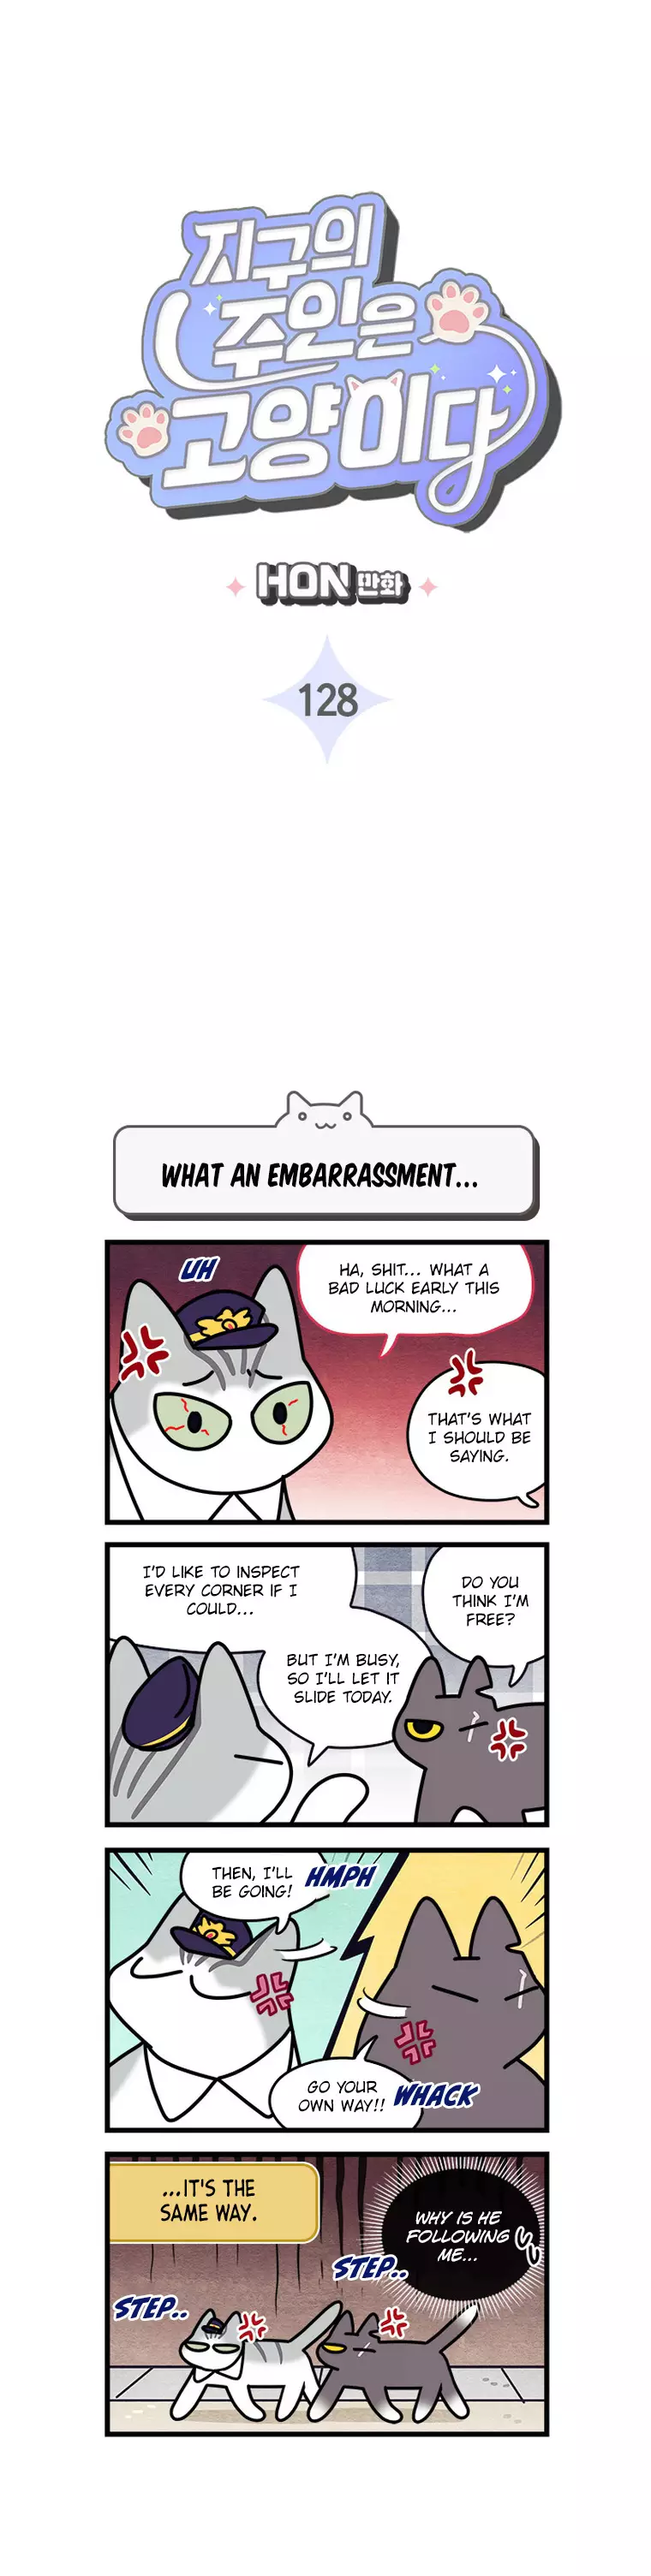 Cats Own The World - 128 page 3-59aafbd4